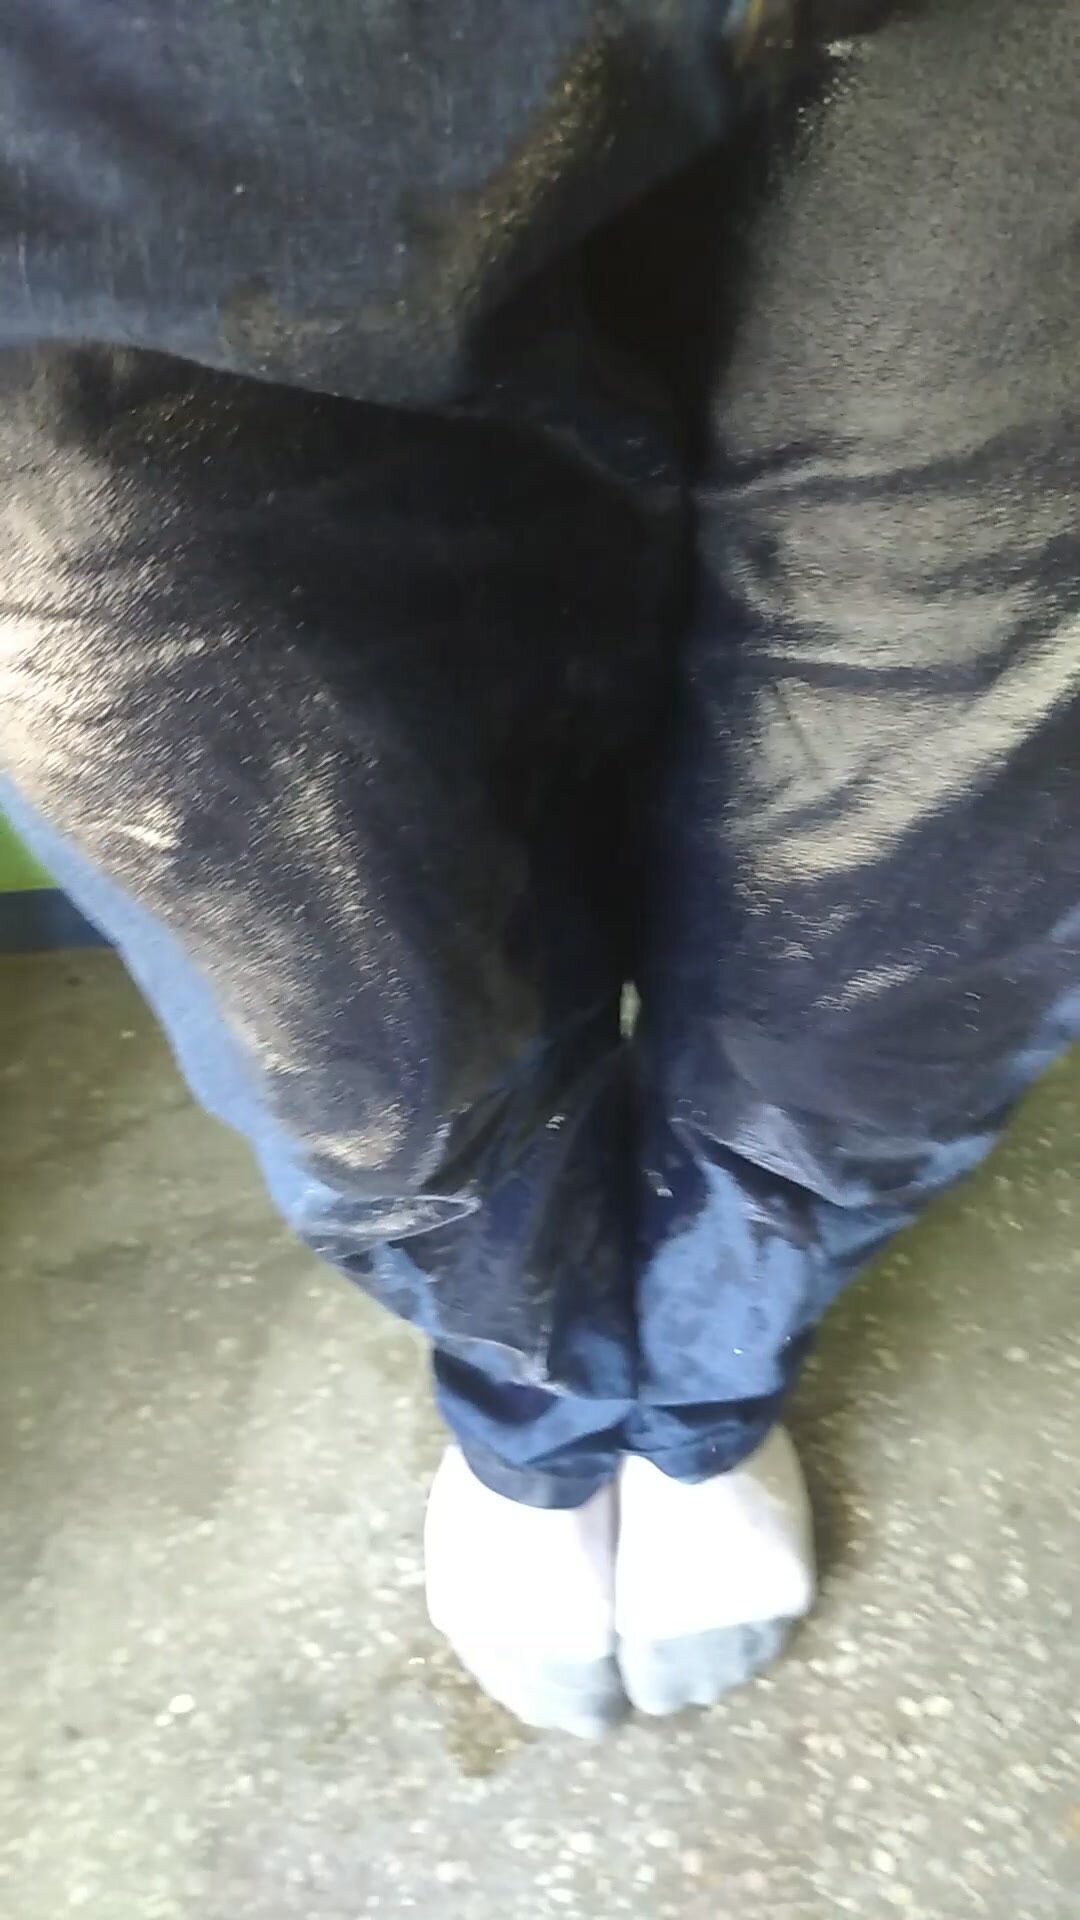 Desperately pissing my jeans in the stiarwell